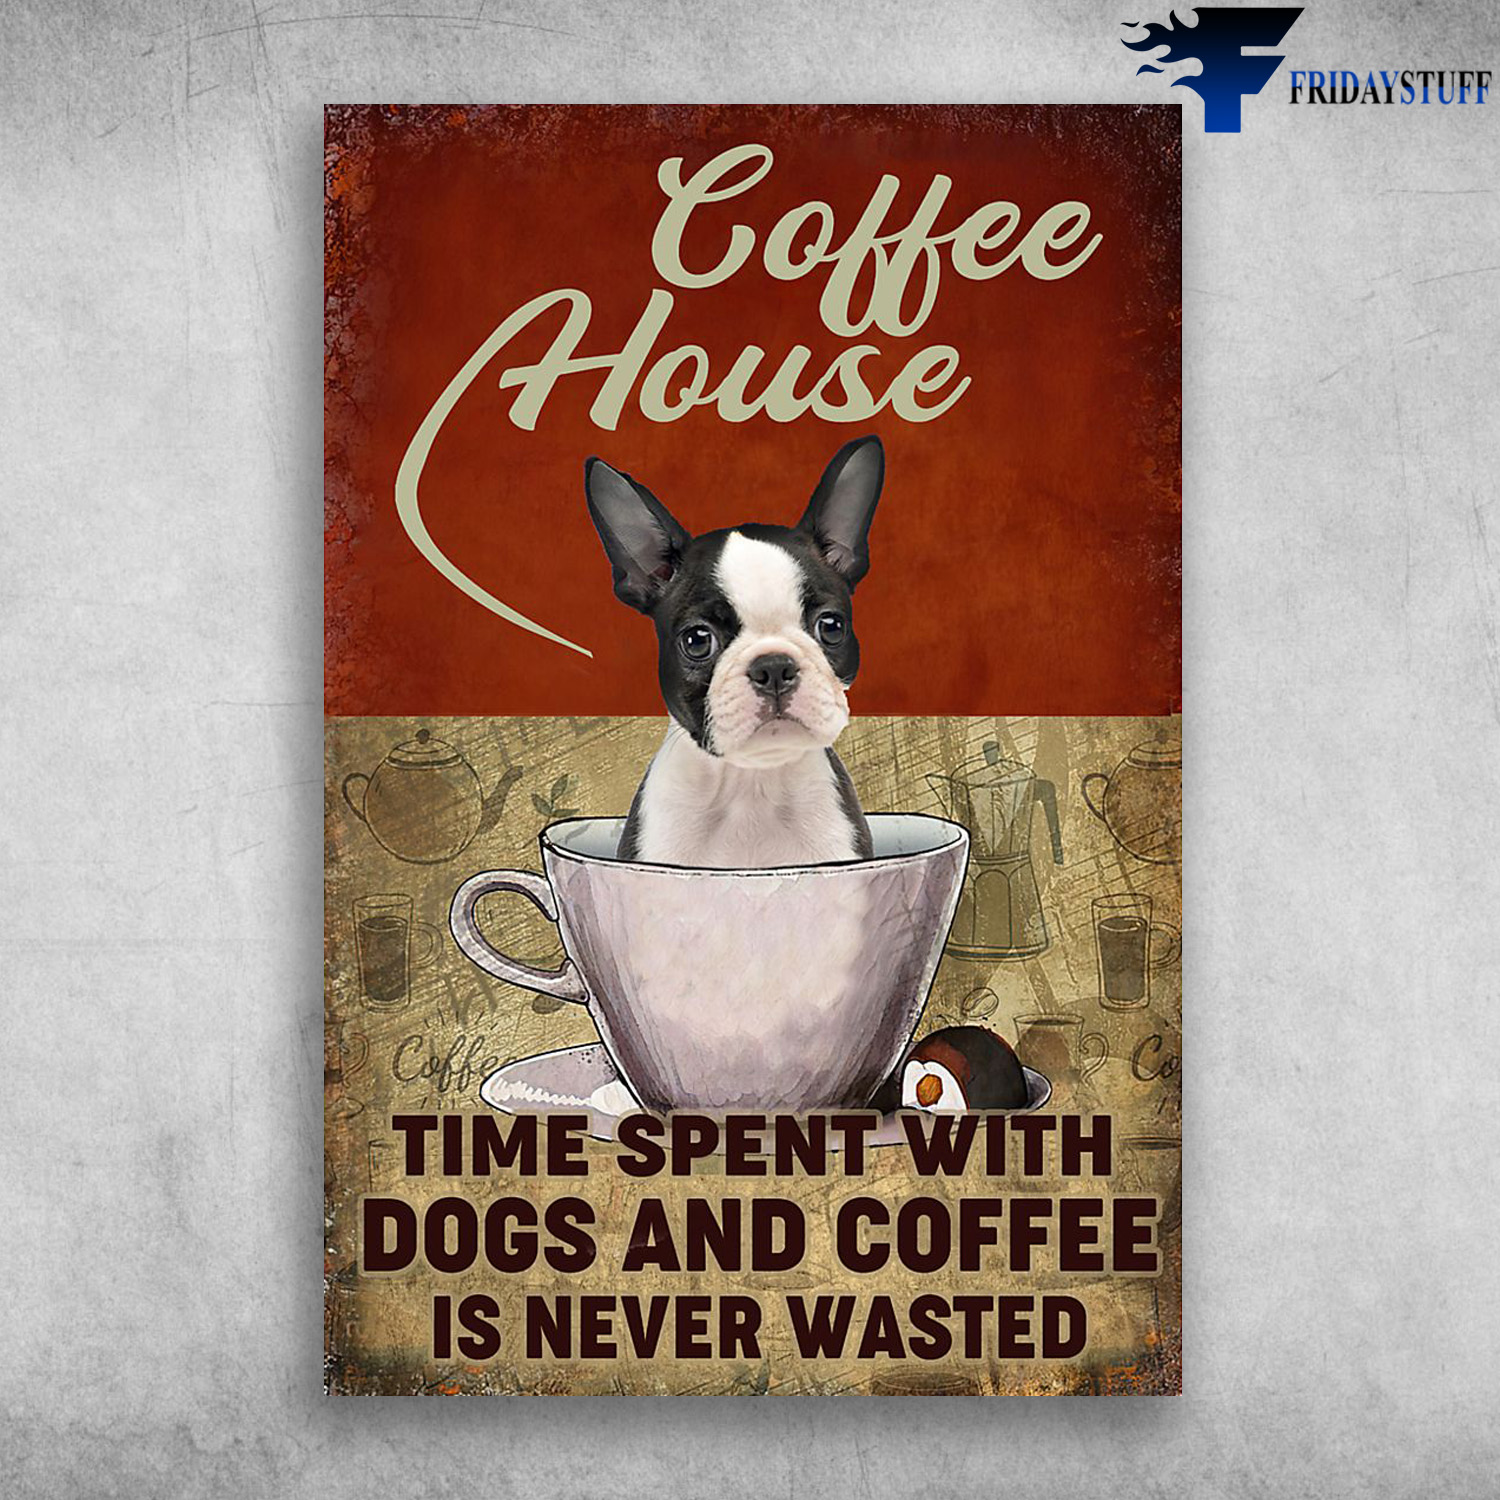 Boston In A Cup Of Coffee - Coffee House, Time Spent With Dogs And Coffee Is Never Wasted